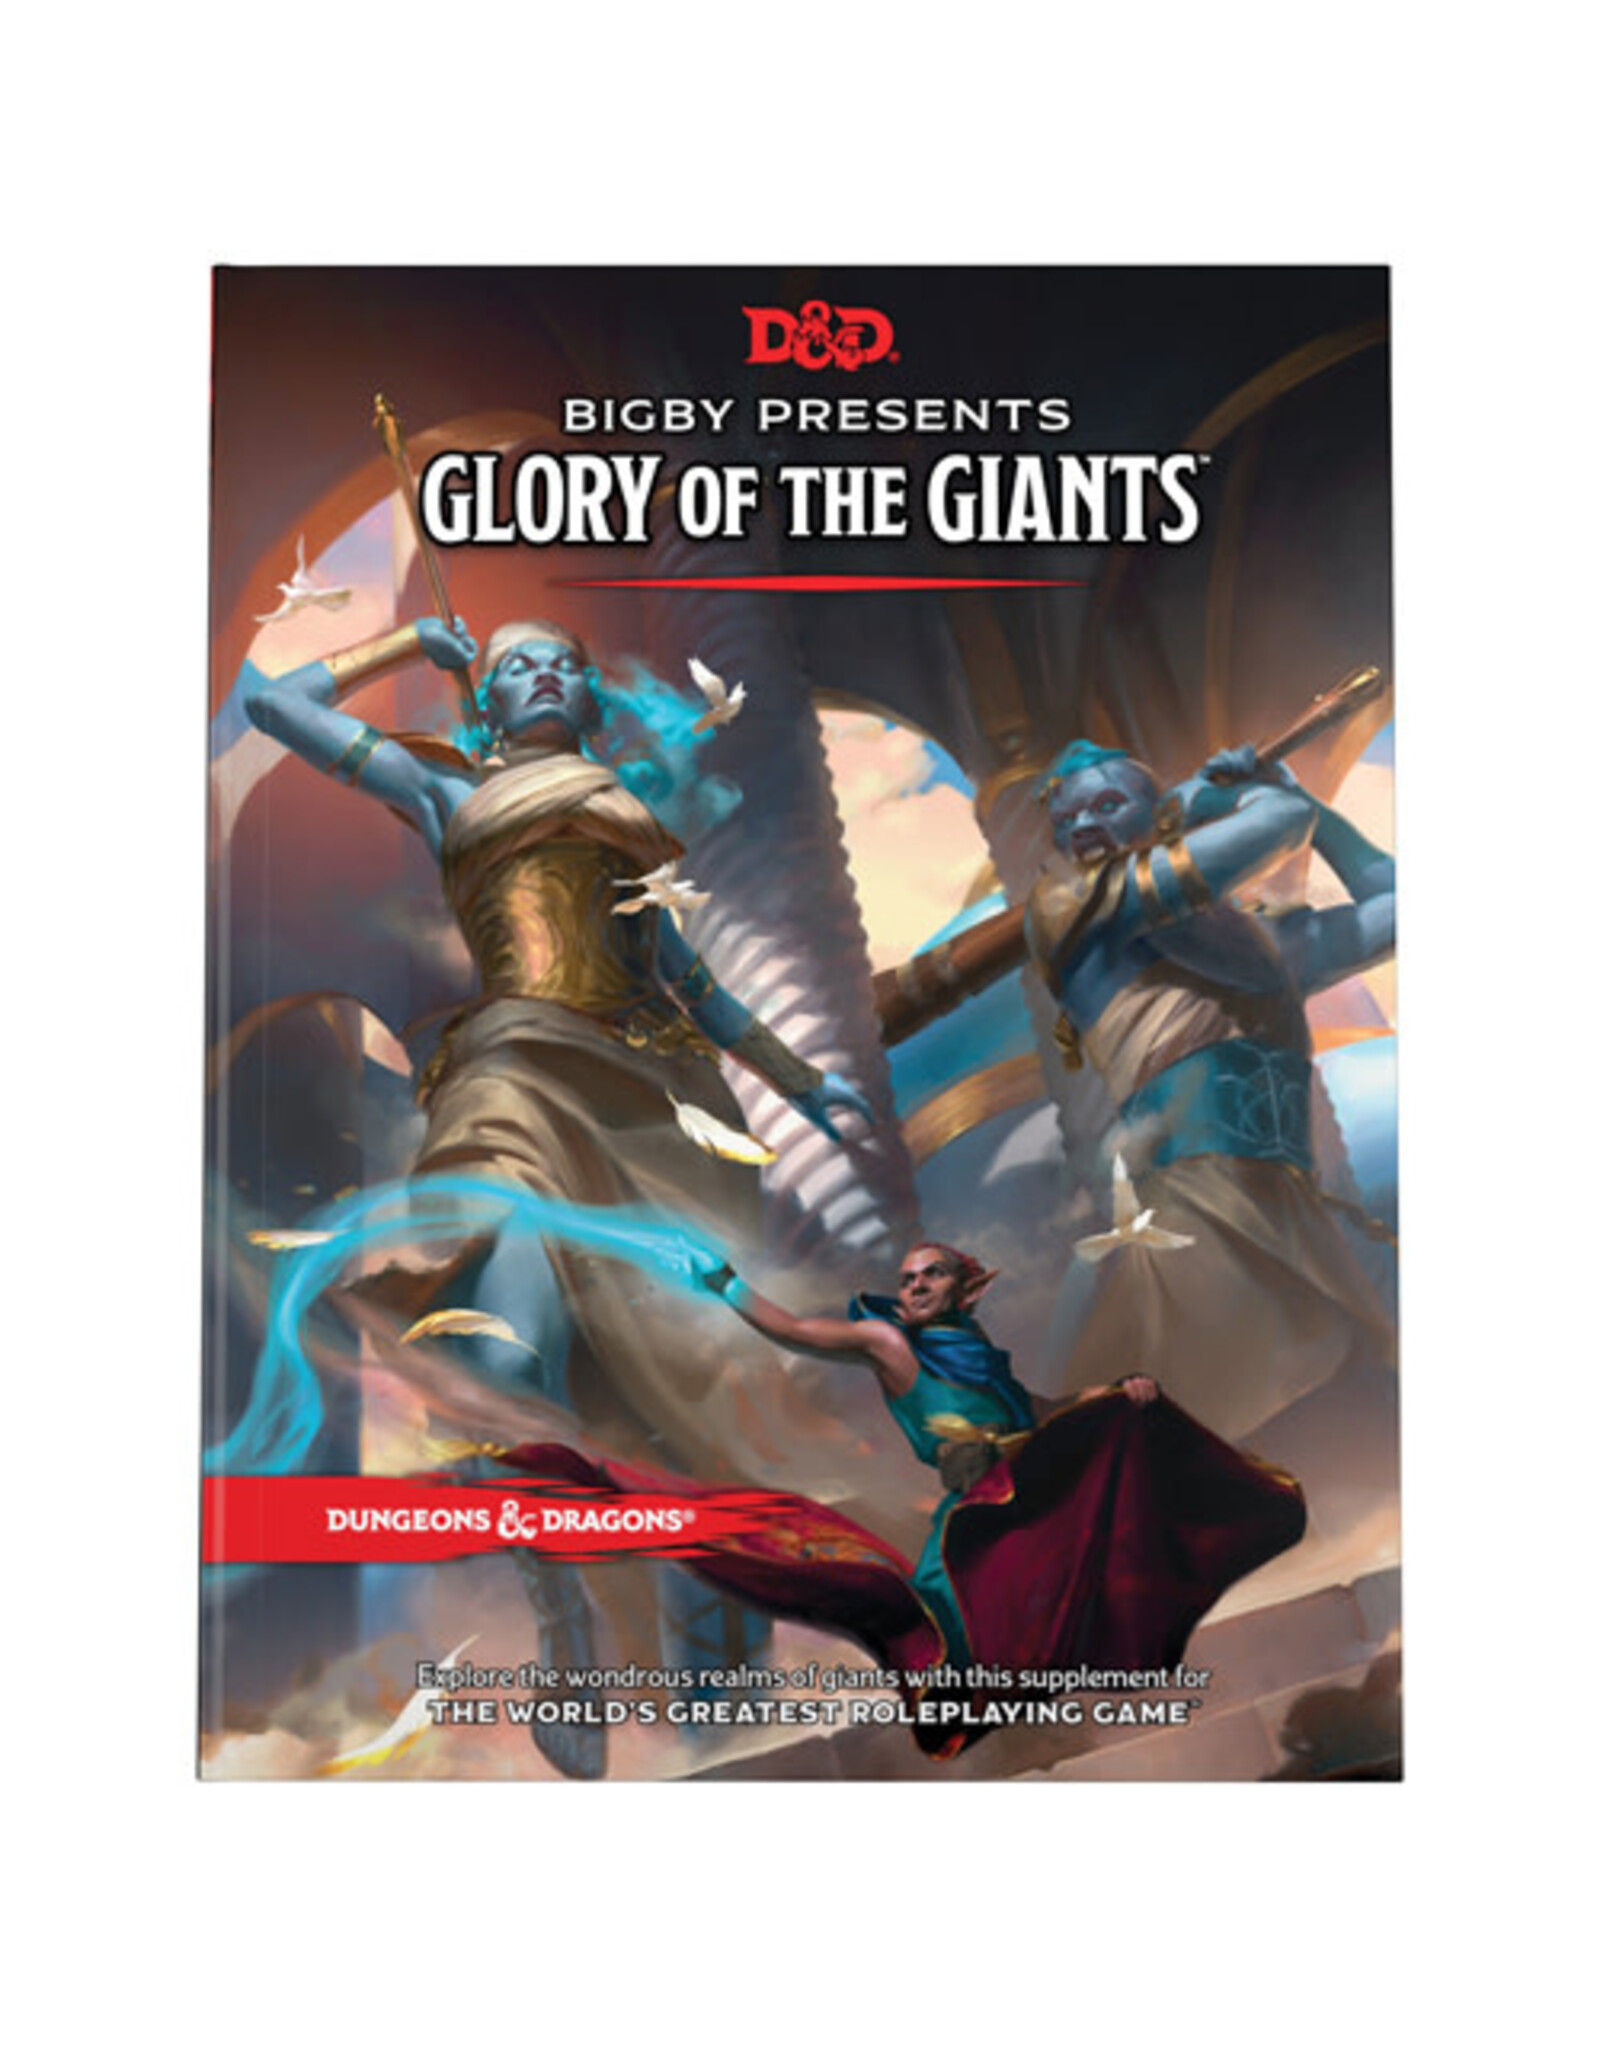 D&D Bigby Presents Glory of the Giants (5E)